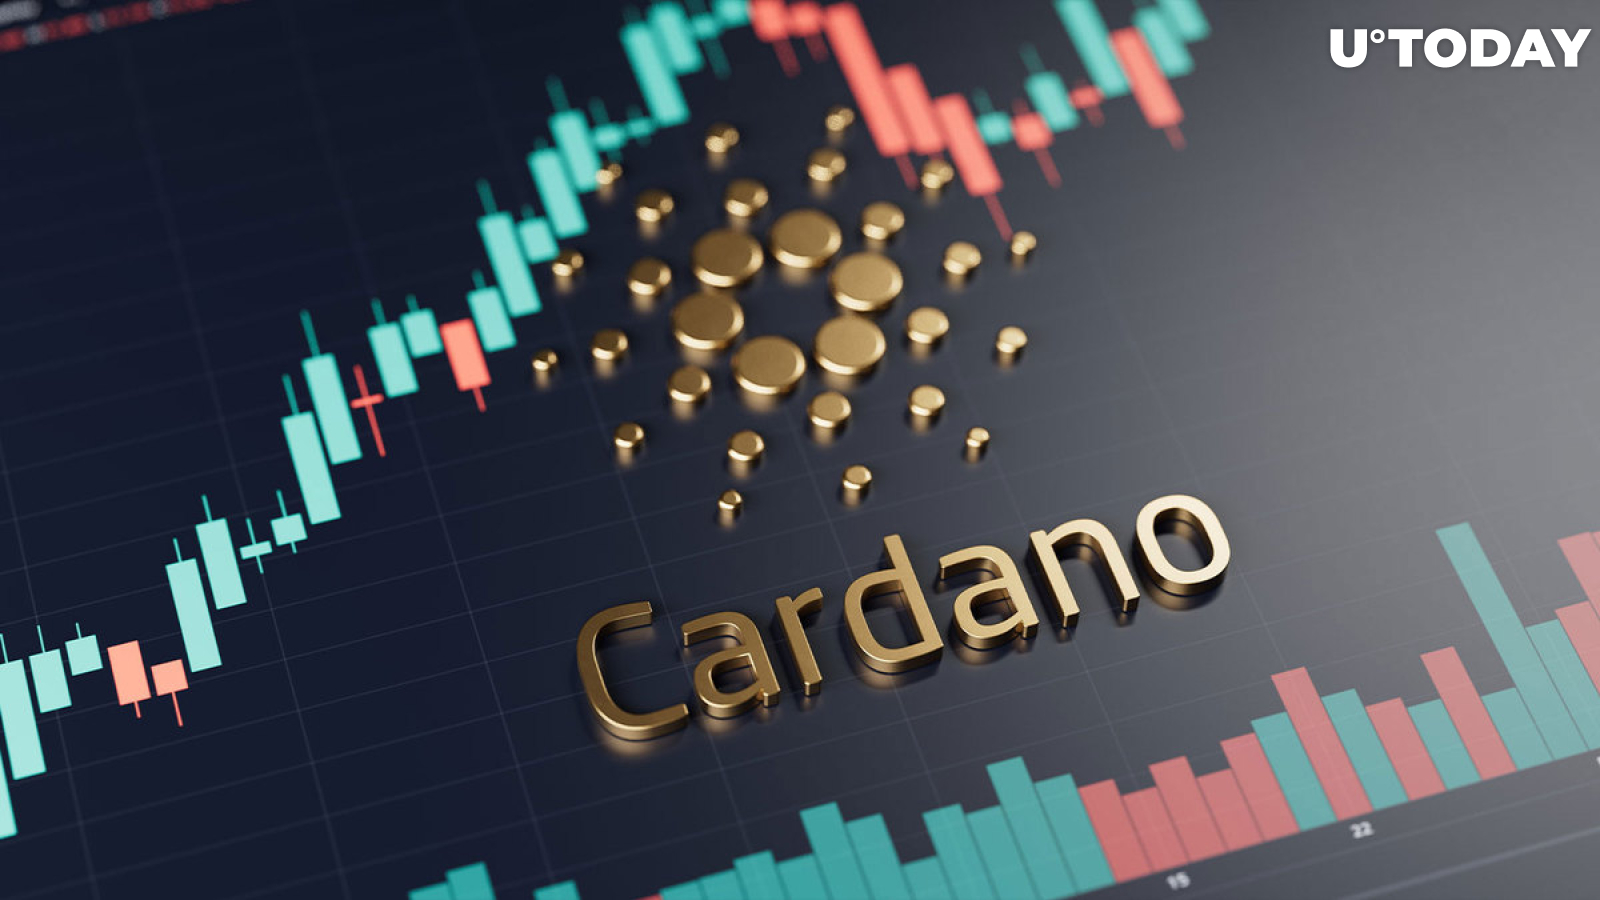 Cardano (ADA) Faces Large Sell-Off Following 14% Price Spike